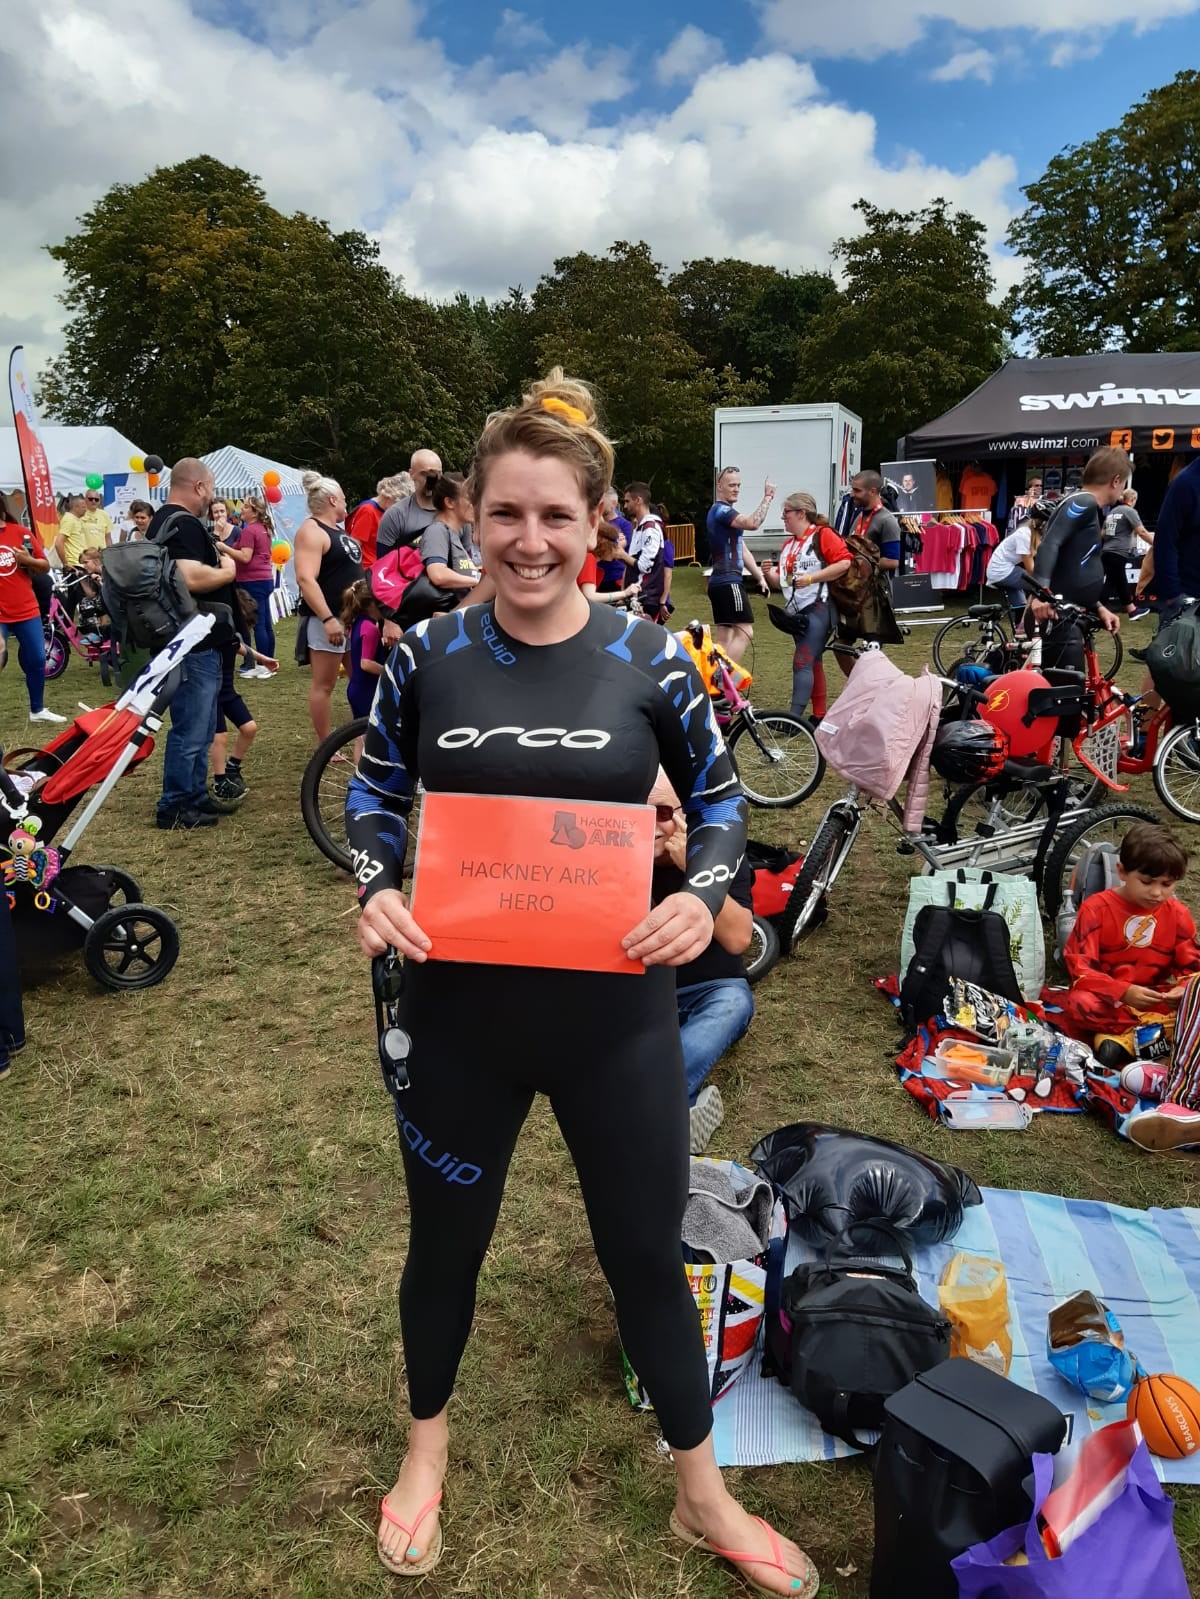 Jacky stands smiling in a wetsuit with a sign, ready to compete in the swim section of the Superhero Series triathlon. She is in a field surrounded by other families who have come to compete with many adapted bikes and prams in view